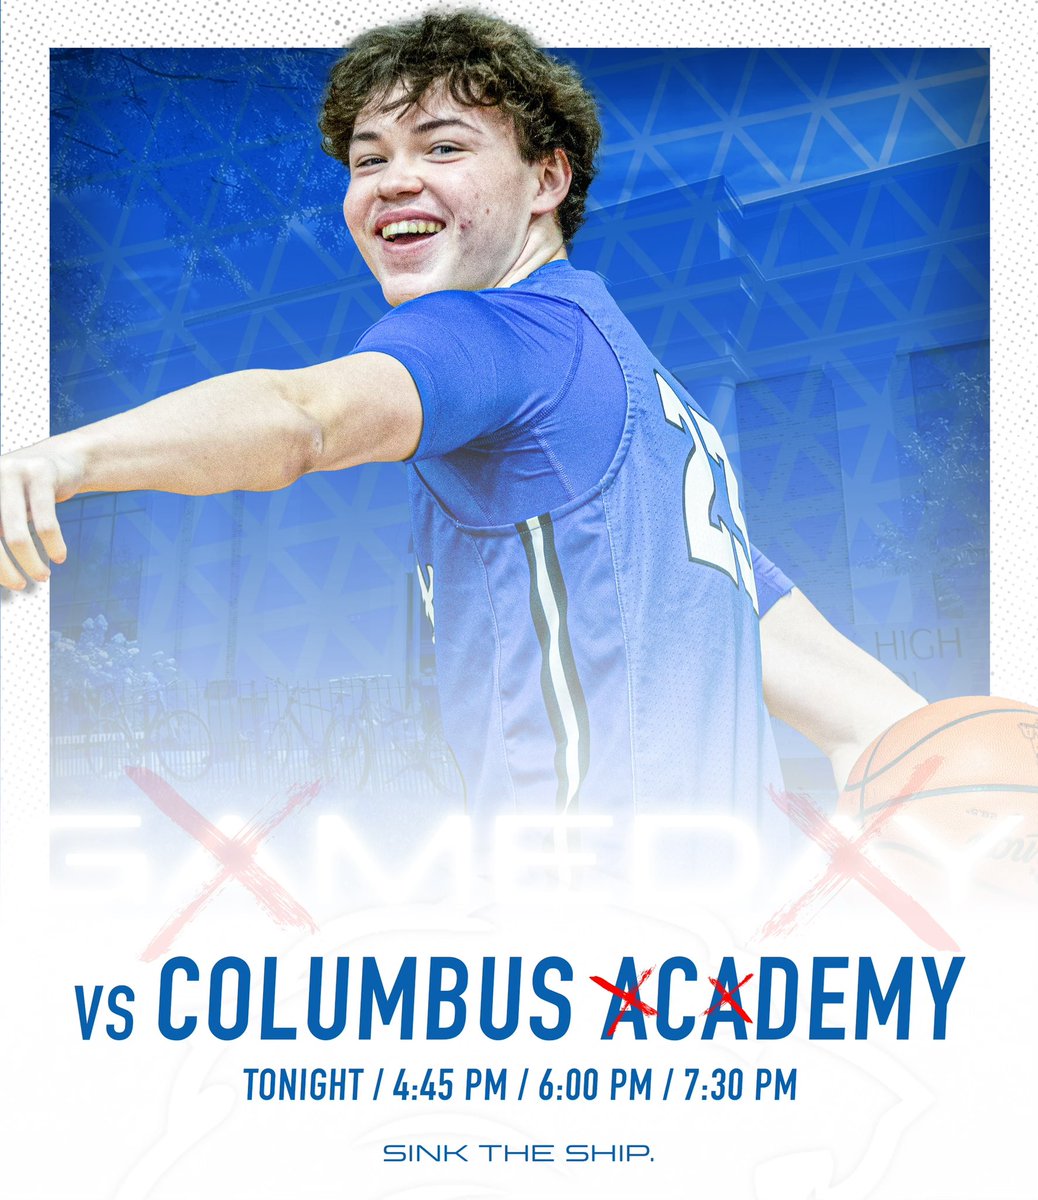 G❌MED❌Y! 

The Lions are back in action tonight in Gahanna for a CBL triple header against Columbus ❌c❌demy!  #SinkTheShip 

🆚Columbus ❌c❌demy Vikings 
⏰ 4:45pm | 6:00pm | 7:30pm 
📍Gahanna, Ohio